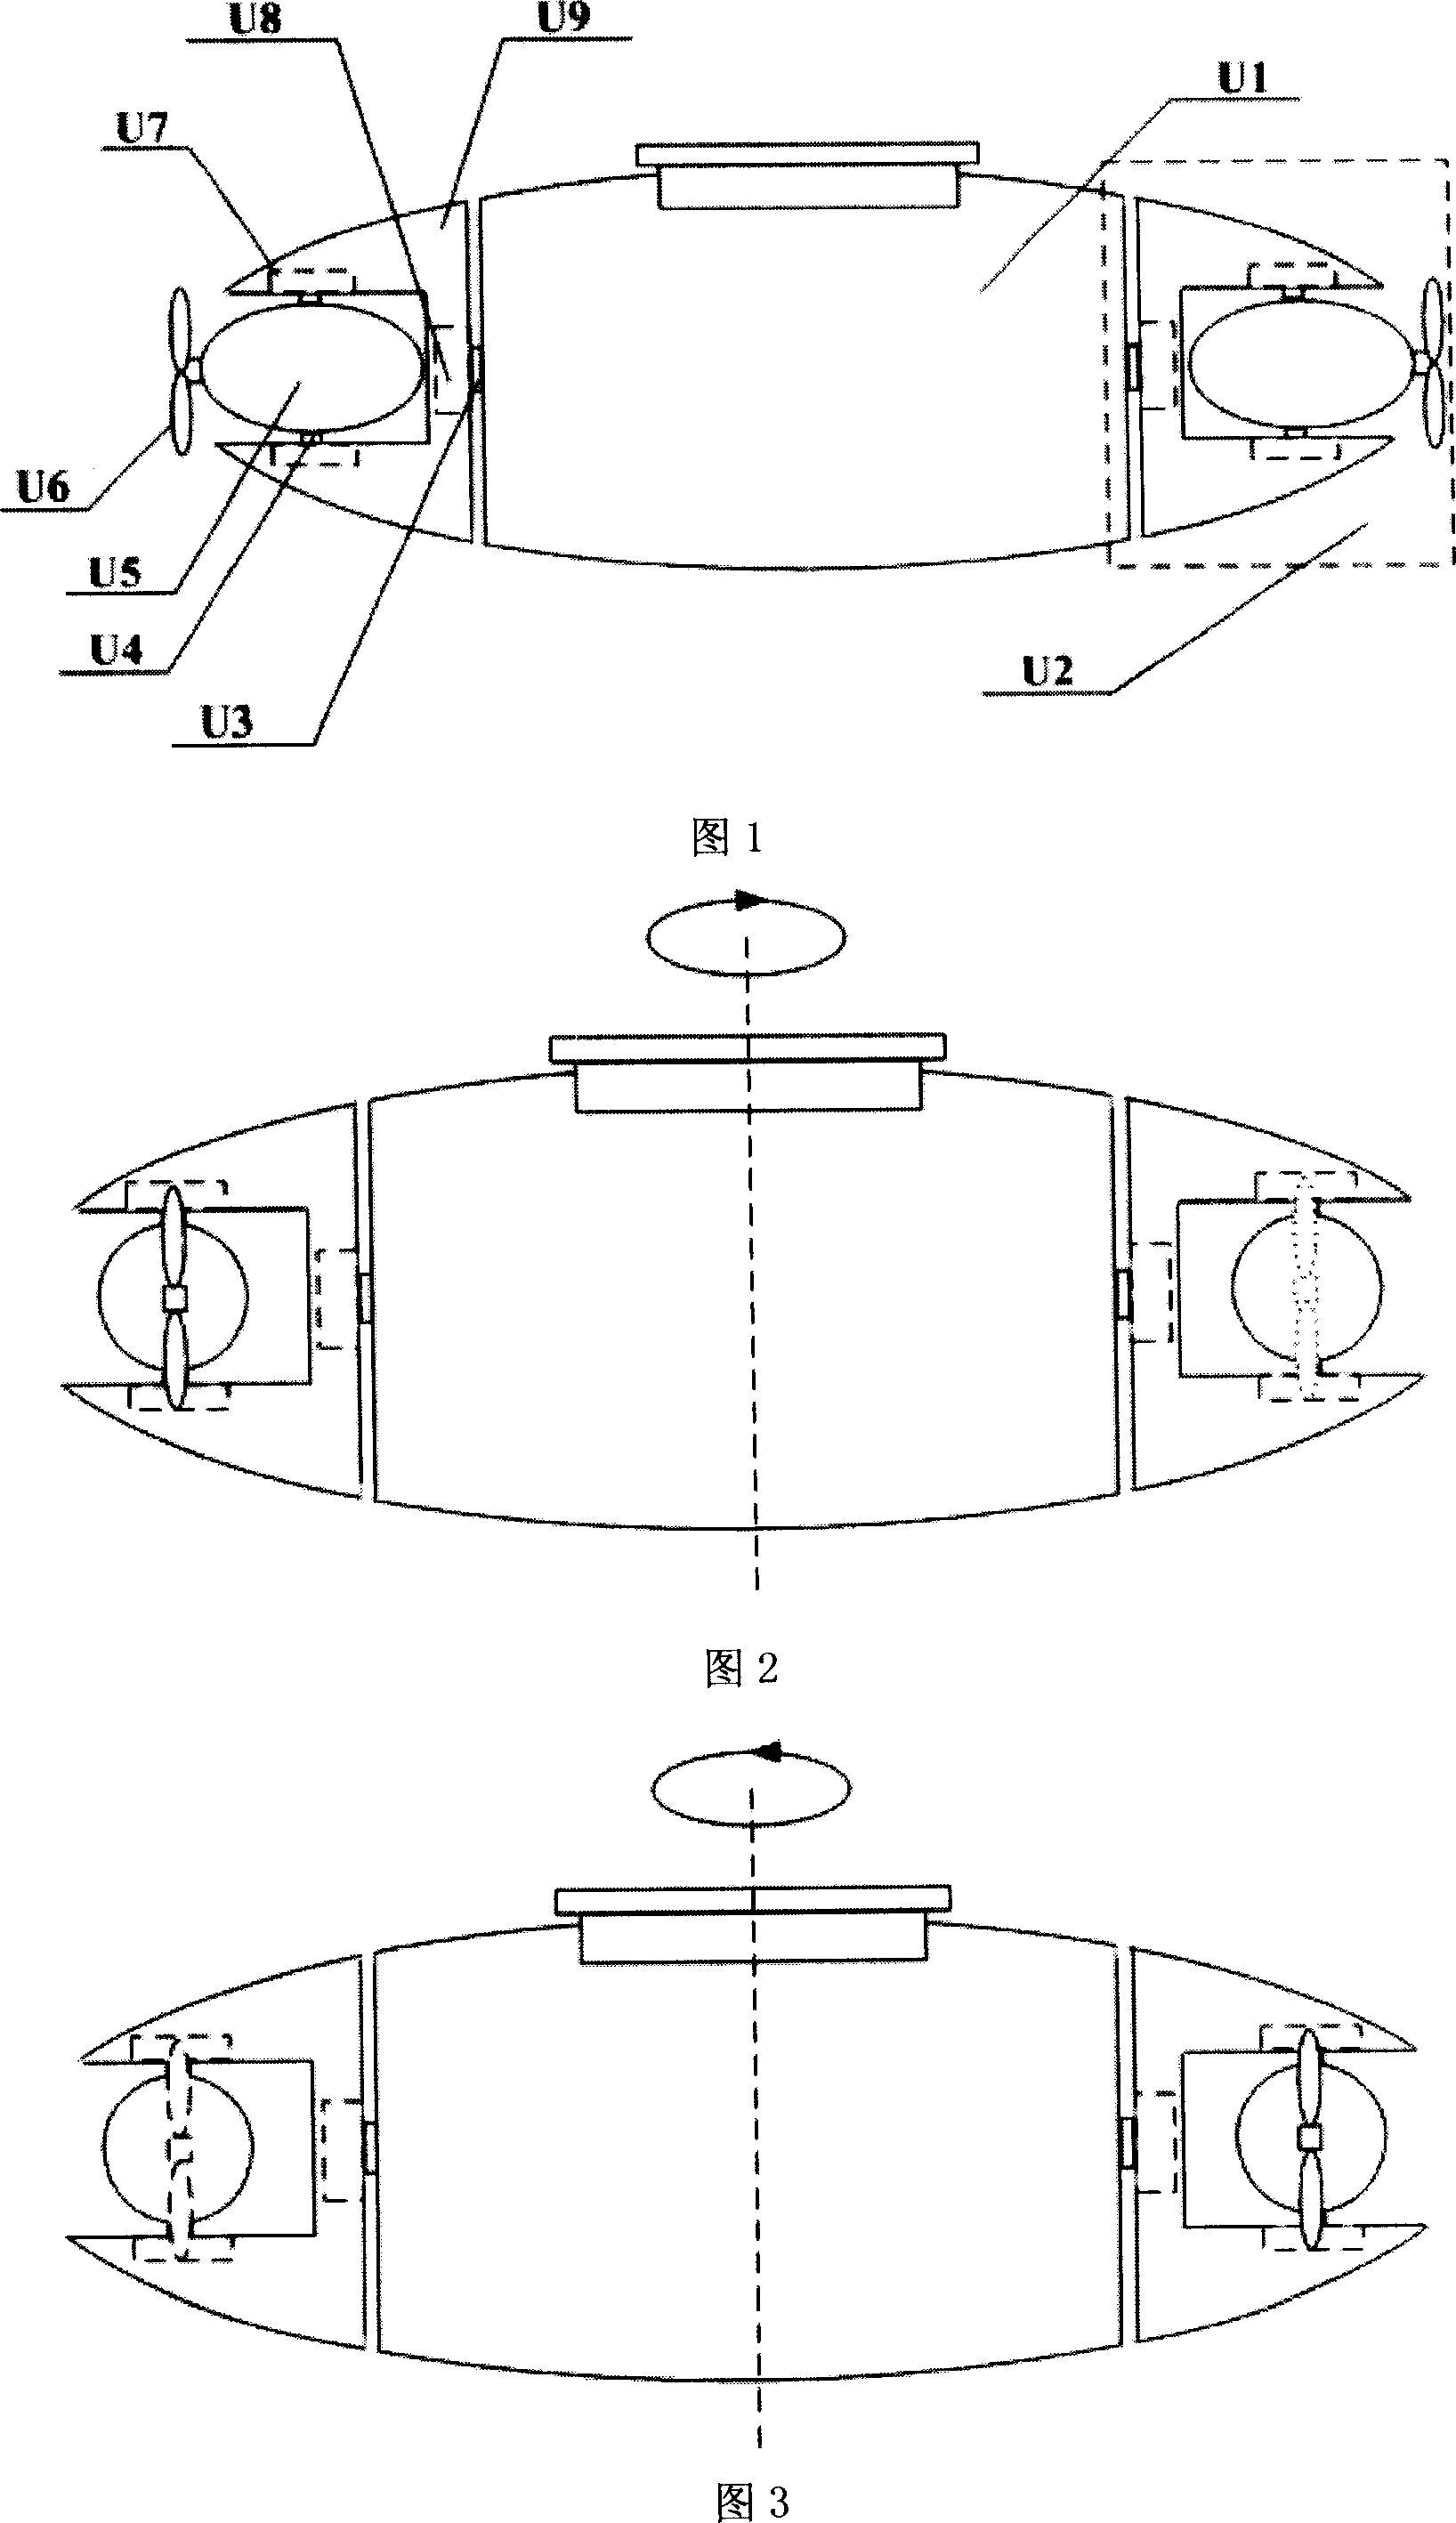 Turning, rotating propeller of underwater robot with six degrees of freedom